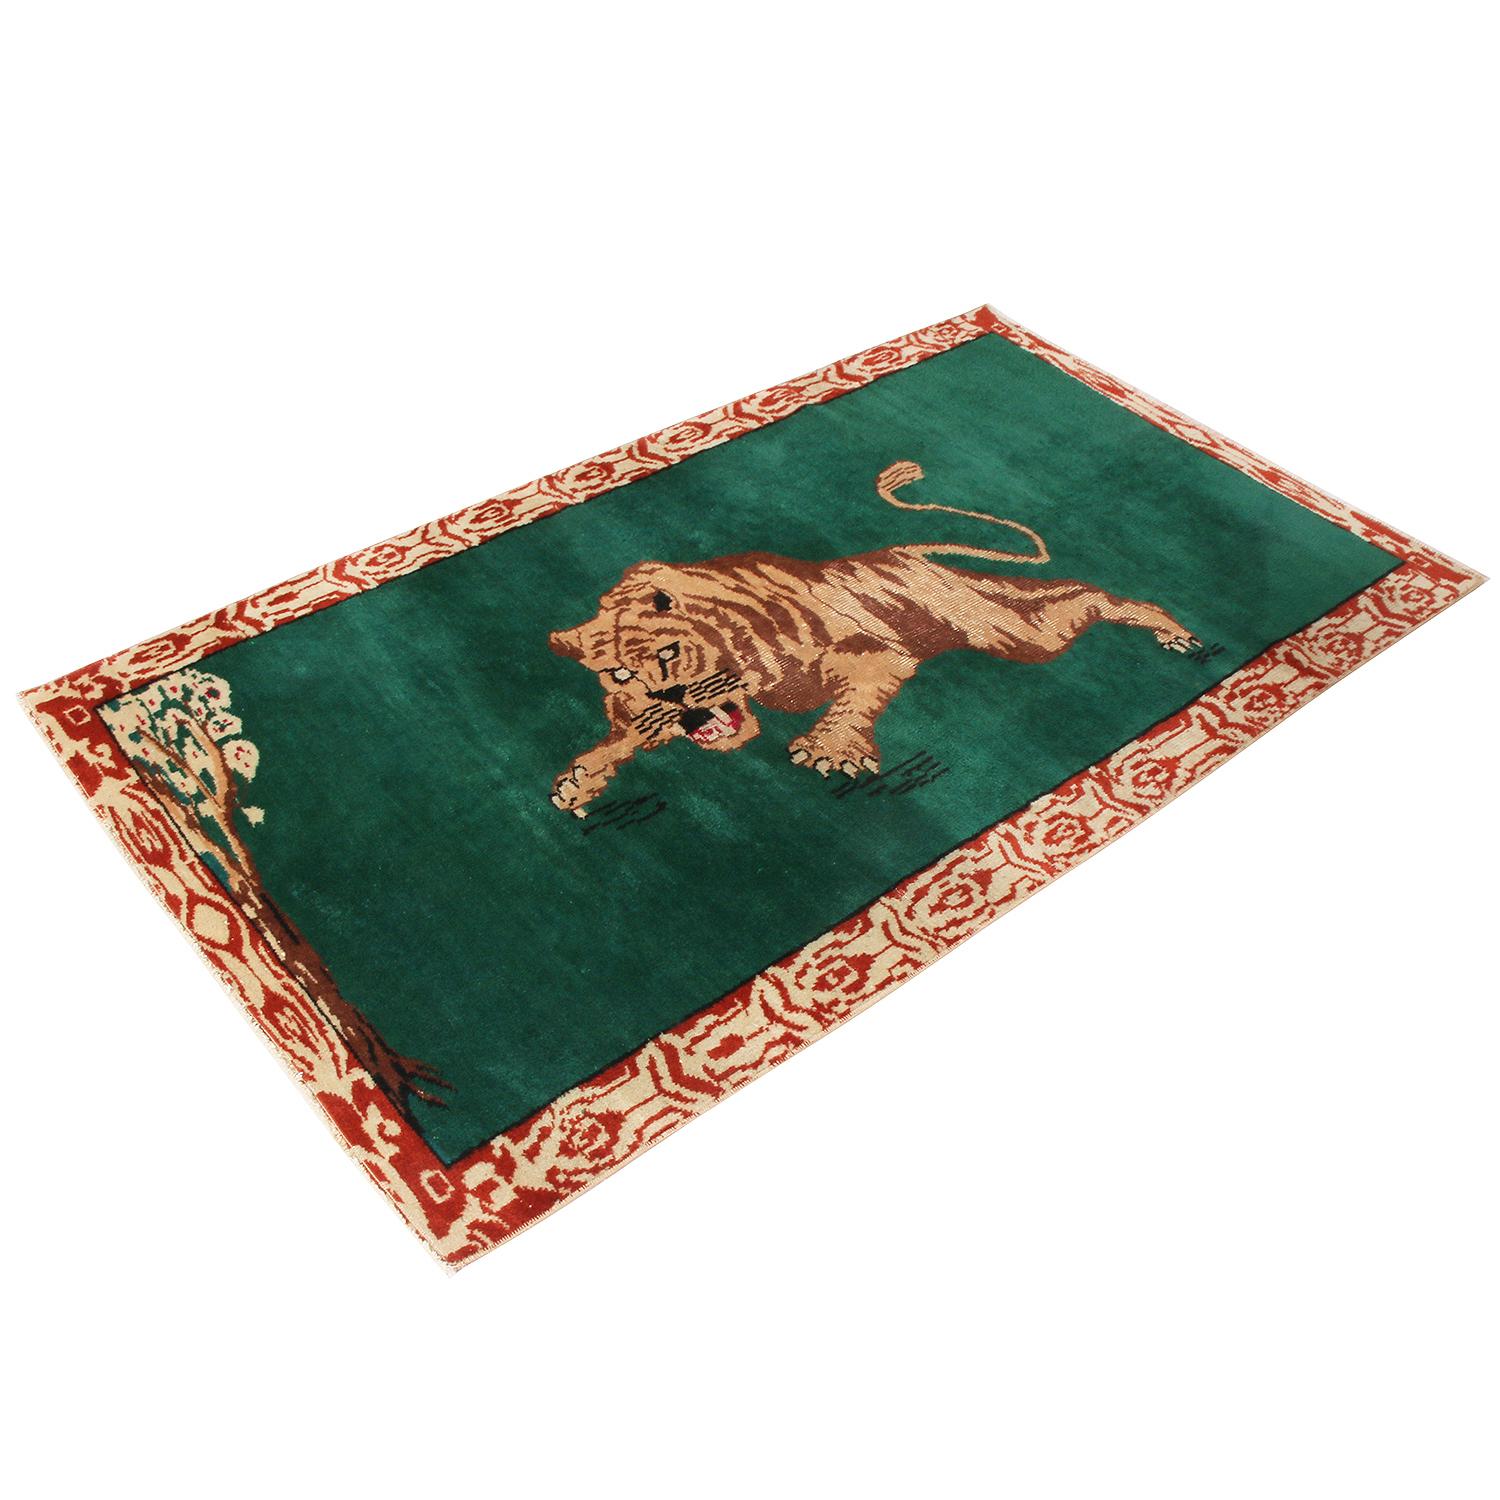 Hand knotted in Turkey originating between 1950-1960, this vintage midcentury wool rug enjoys one of the more uncommon, dimensionally arresting variations of a pictorial Tiger motif with a warm palette of beige-brown earth tones set against an